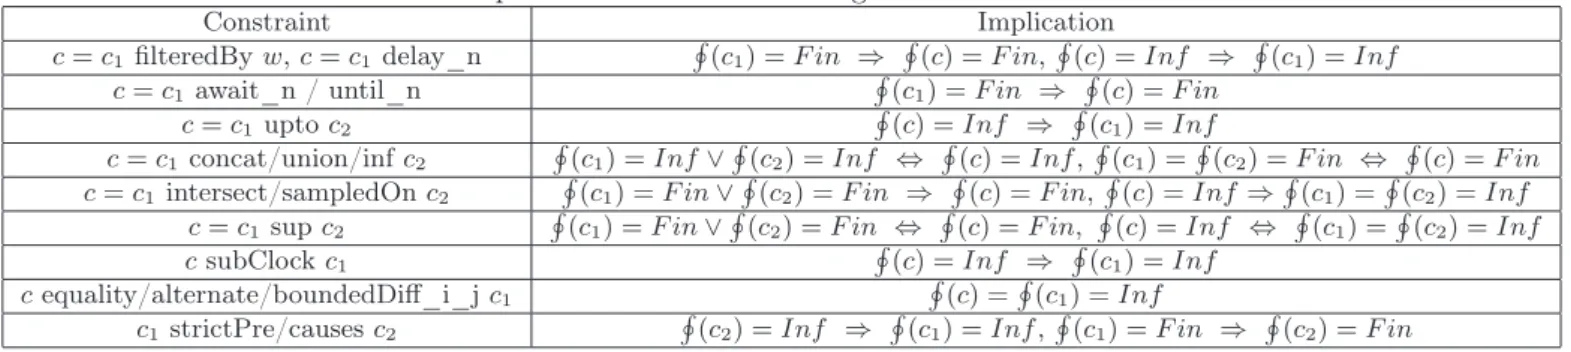 Table 1: Acceptance condition minimizing rules Constraint Implication c = c 1 filteredBy w, c = c 1 delay_n H (c 1 ) = F in ⇒ H (c) = F in, H (c) = Inf ⇒ H (c 1 ) = Inf c = c 1 await_n / until_n H (c 1 ) = F in ⇒ H (c) = F in c = c 1 upto c 2 H (c) = Inf ⇒